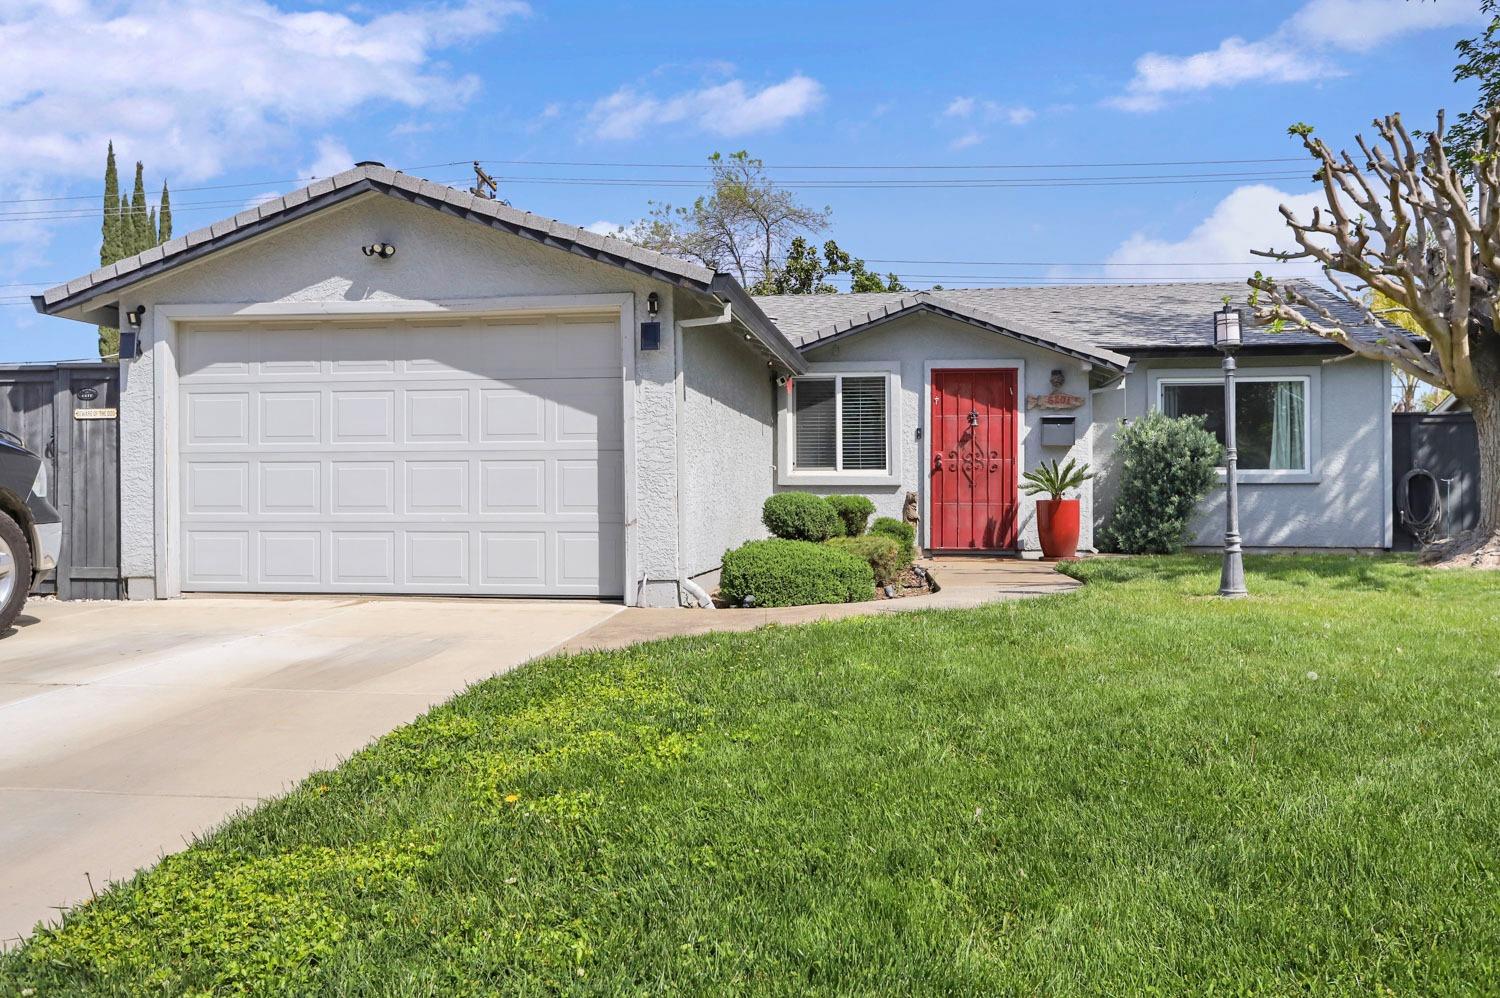 Photo of 6201 Sylvester Wy in Carmichael, CA